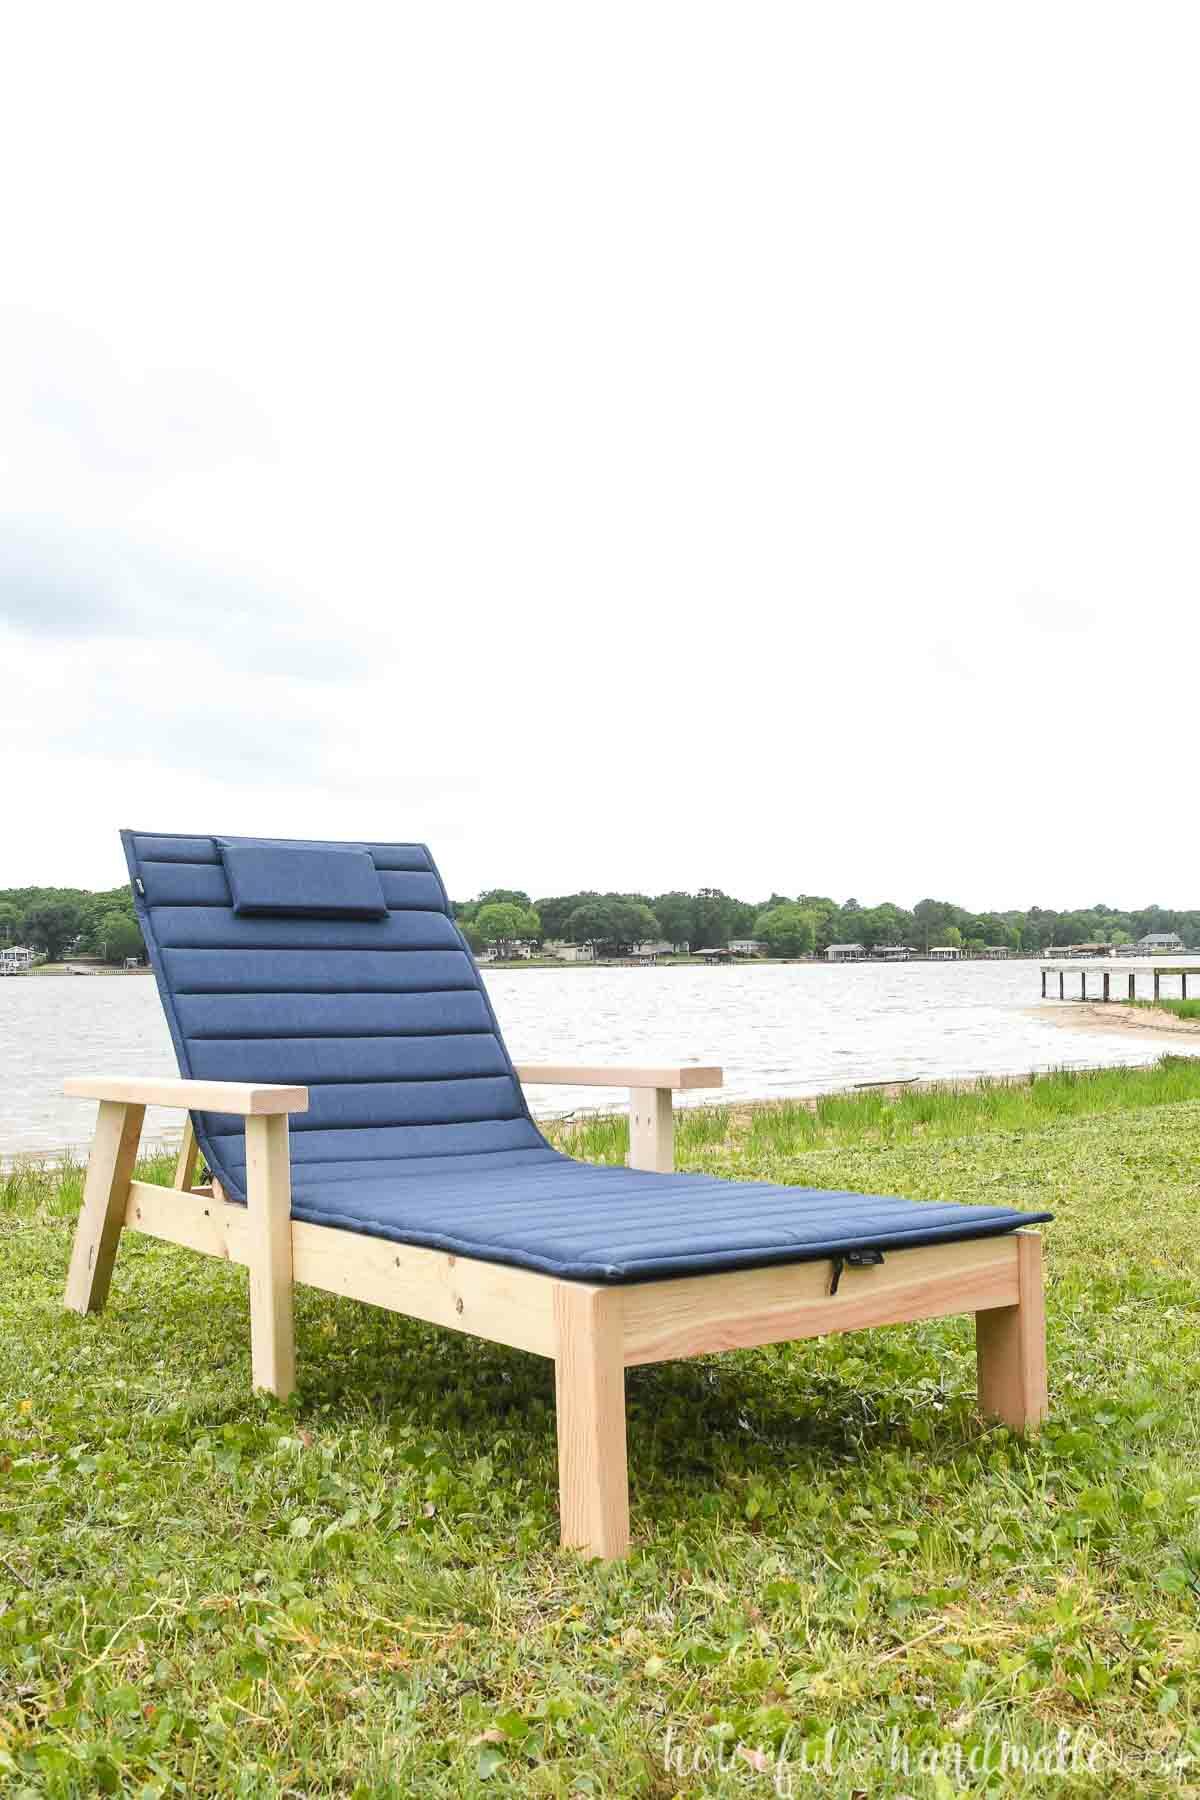 Wood chaise lounge chair with navy cushion on a lawn in front of a lake.